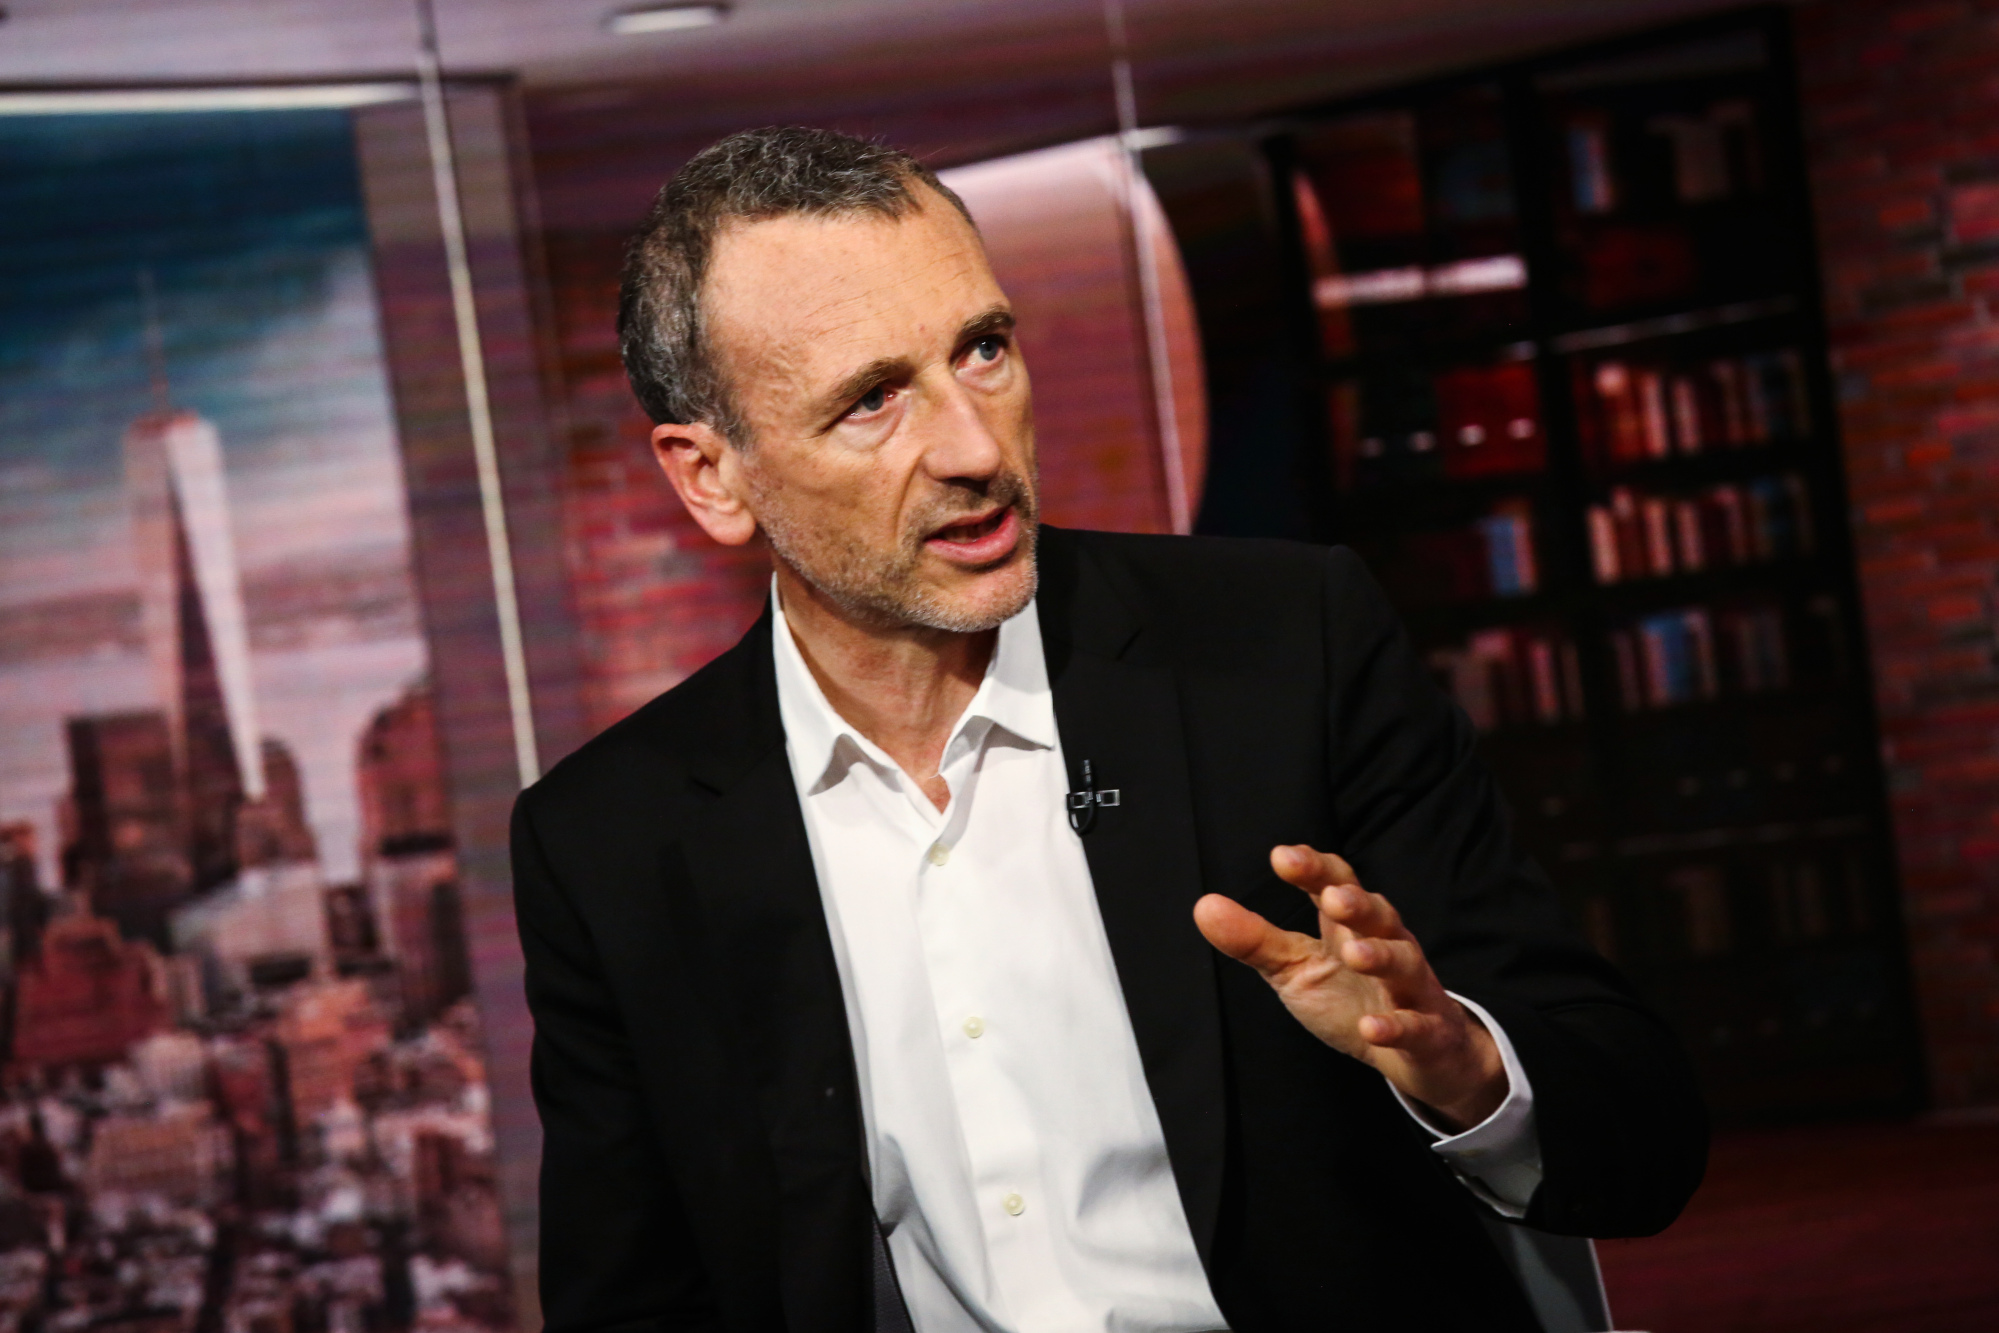 Danone SA Chief Executive Officer Emmanuel Faber Interview